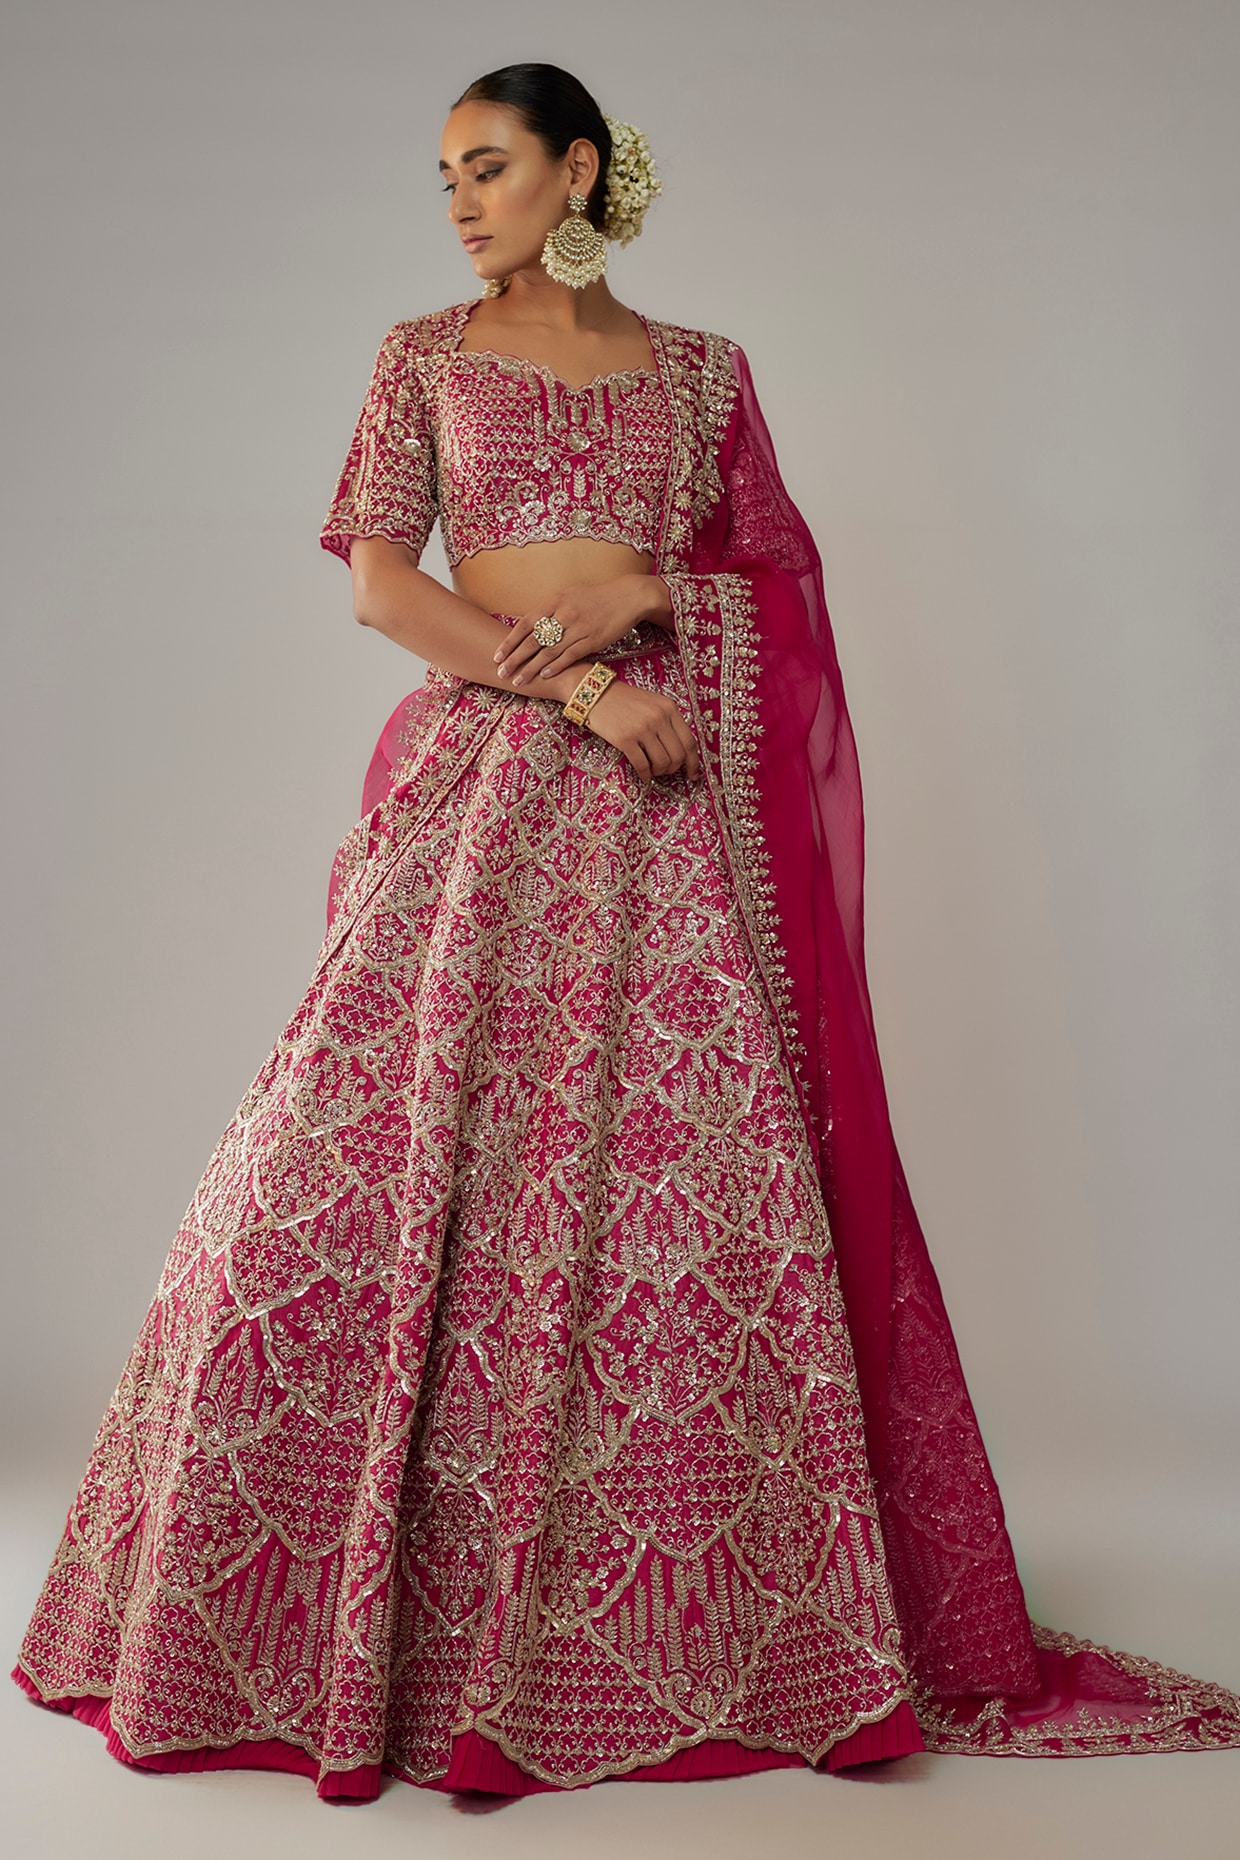 HOW TO STYLE LEHENGA WITH JEWELLERY TO TURNS HEADS! - Baggout